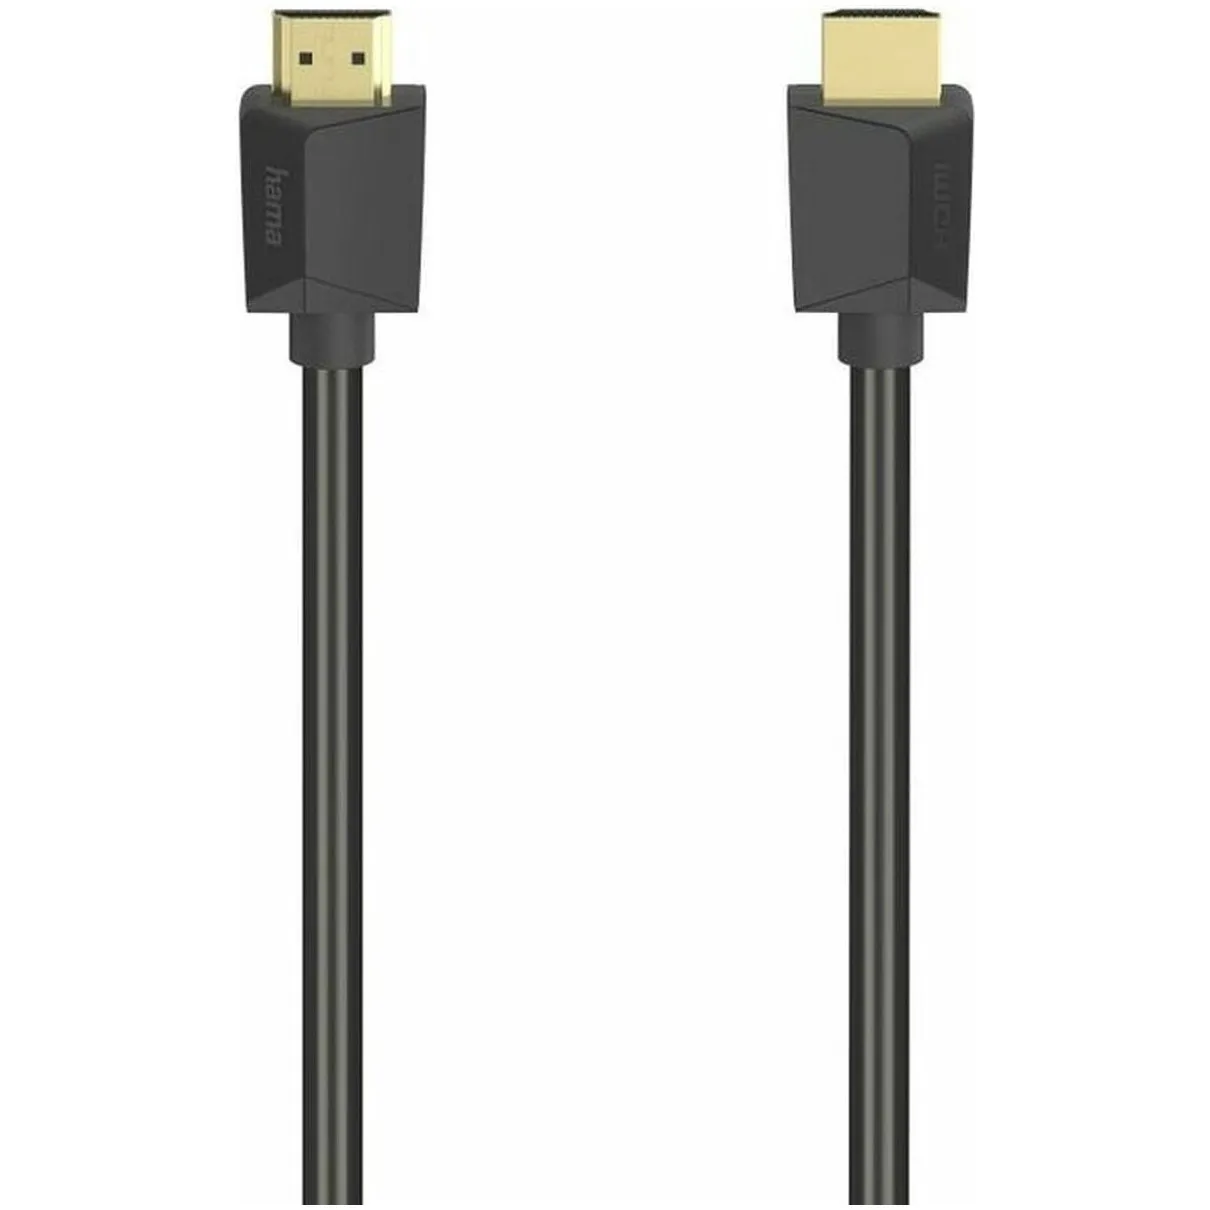 Hama HIGH-SPEED HDMI-KABEL, 4K, CONNECTOR - CONNECTOR, ETHERNET, 5,0 M